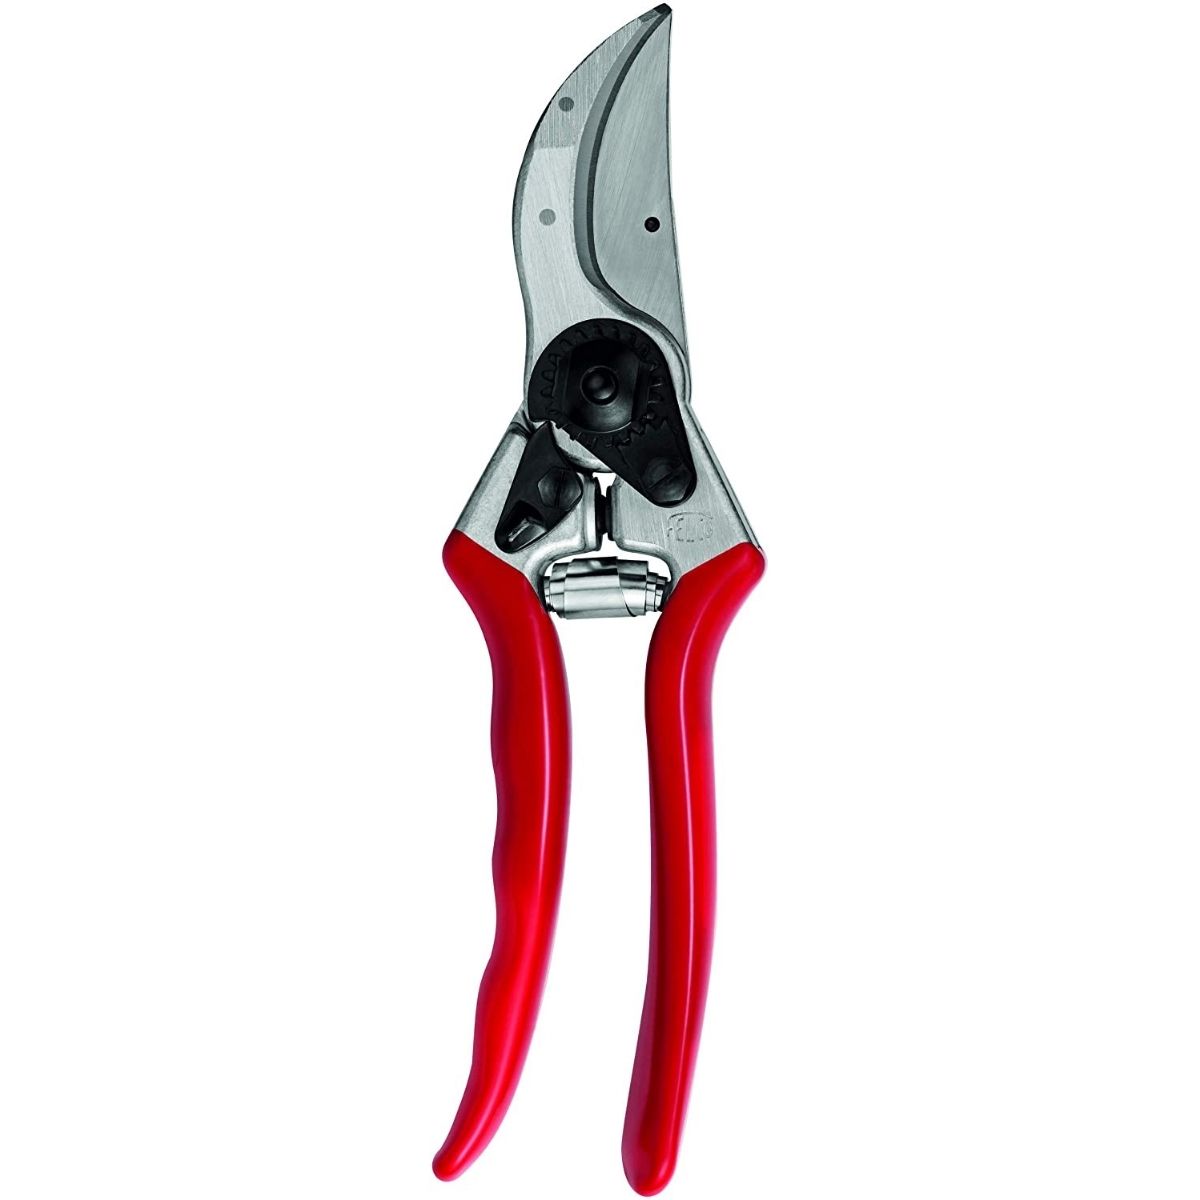 The Gifts for Gardeners Option: Felco Classic Manual Hand Pruner